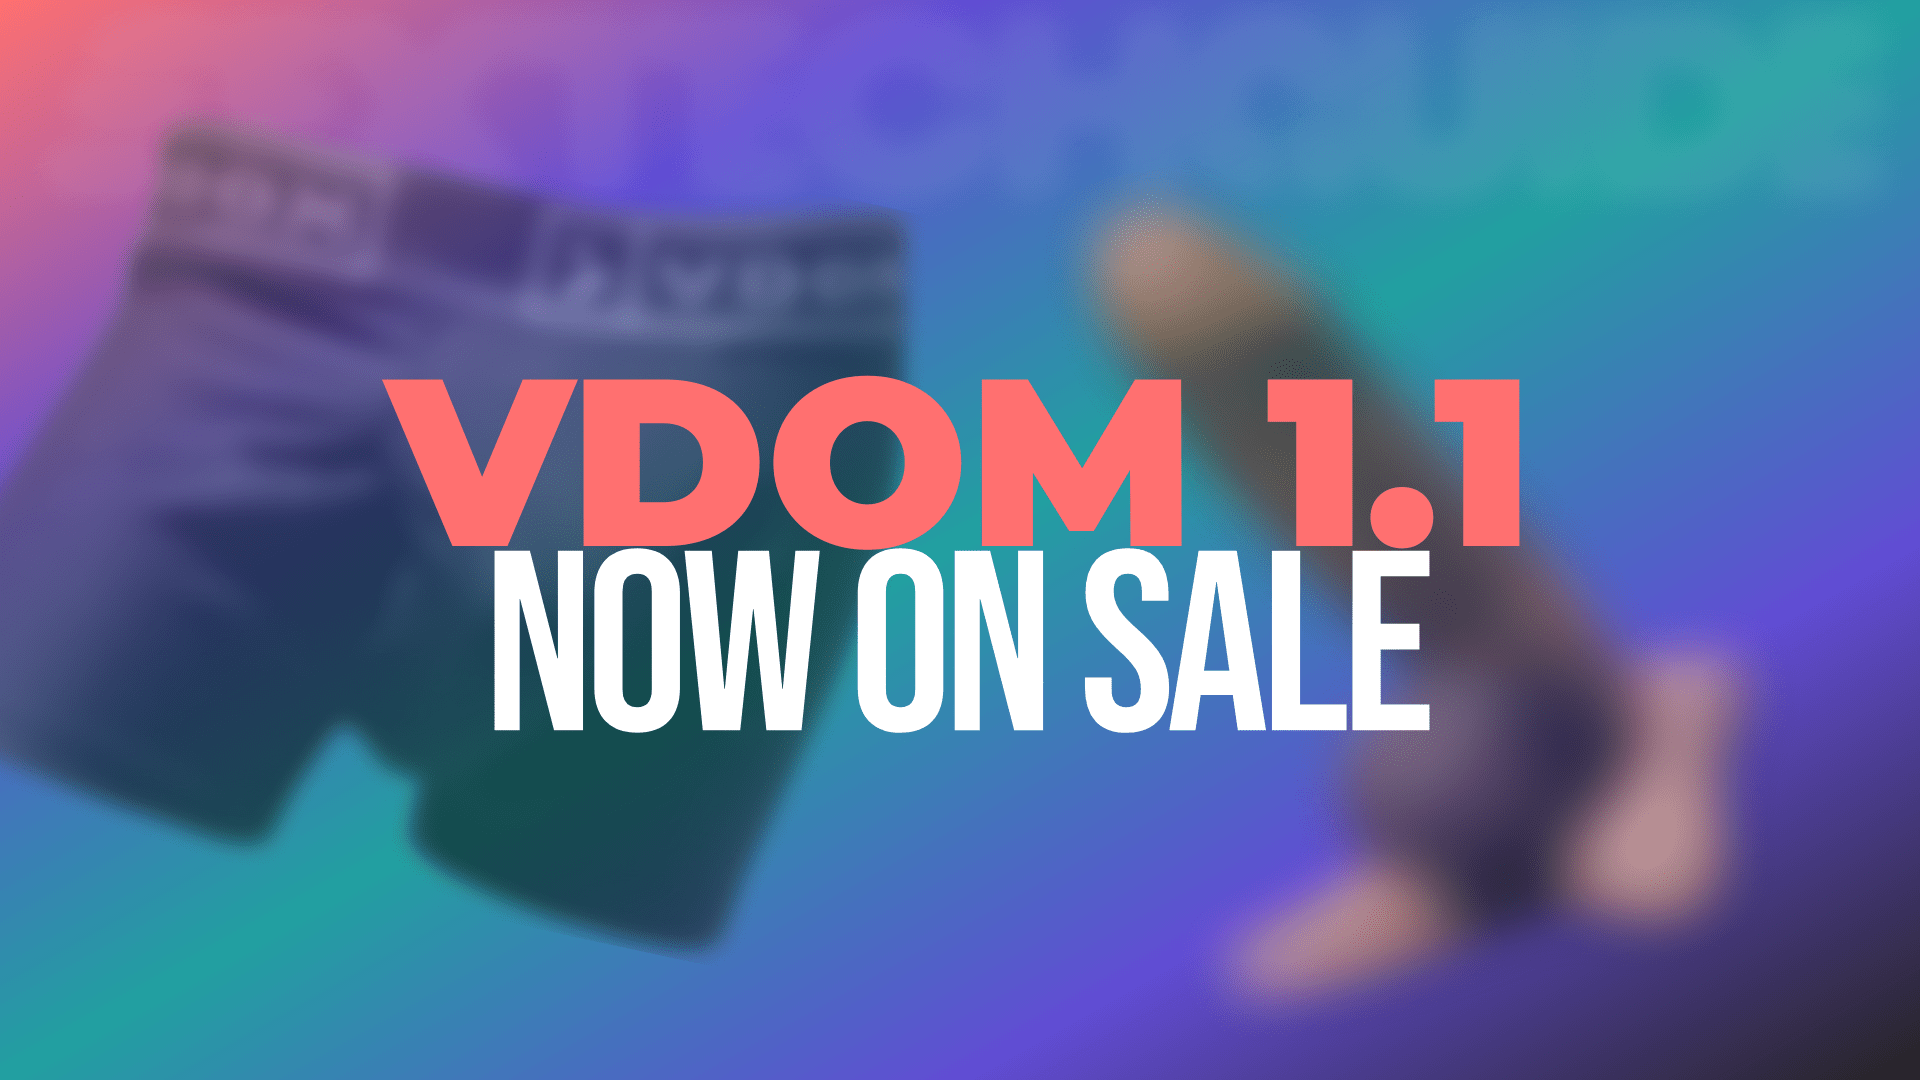 VDOM v1.1 Smart Wearable Penis Tech Finally Launched